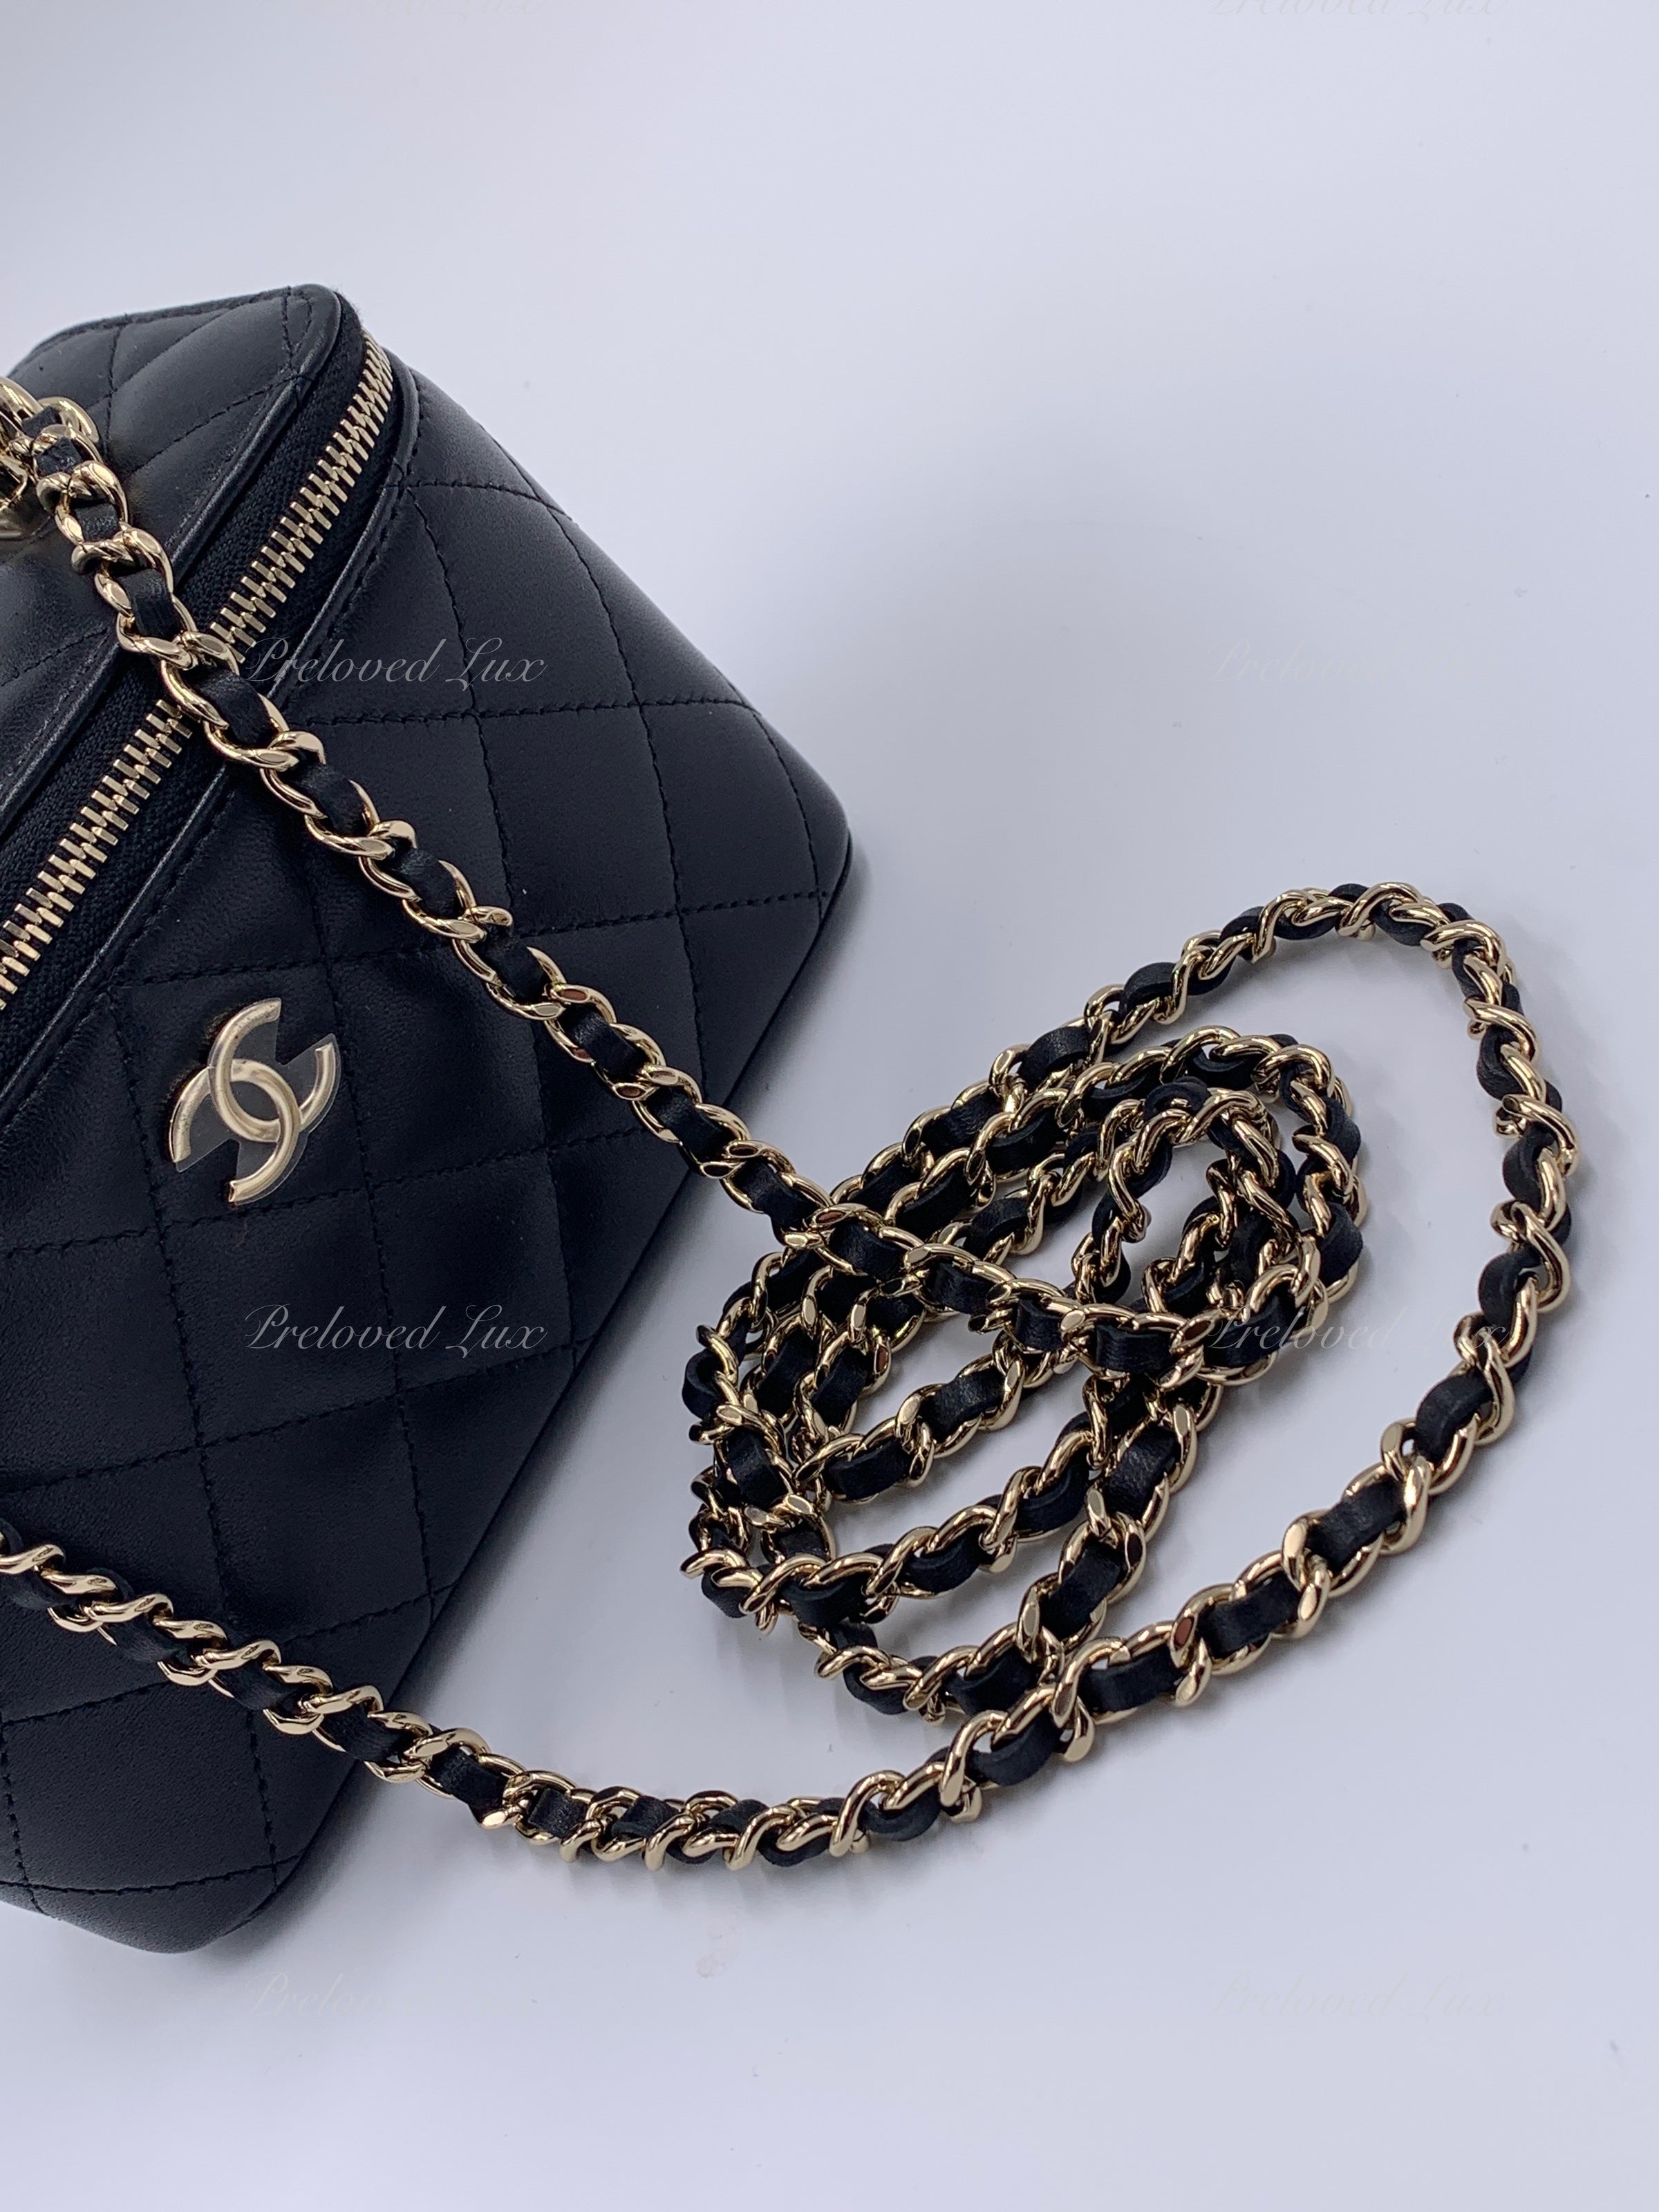 Bonhams : CHANEL BLUE BOUCLÉ TWEED AND SNAKE LEATHER CC FILIGREE VANITY  CASE BAG WITH GOLD TONED HARDWARE 2018 (Includes authenticity card, original  dust bag and original box)